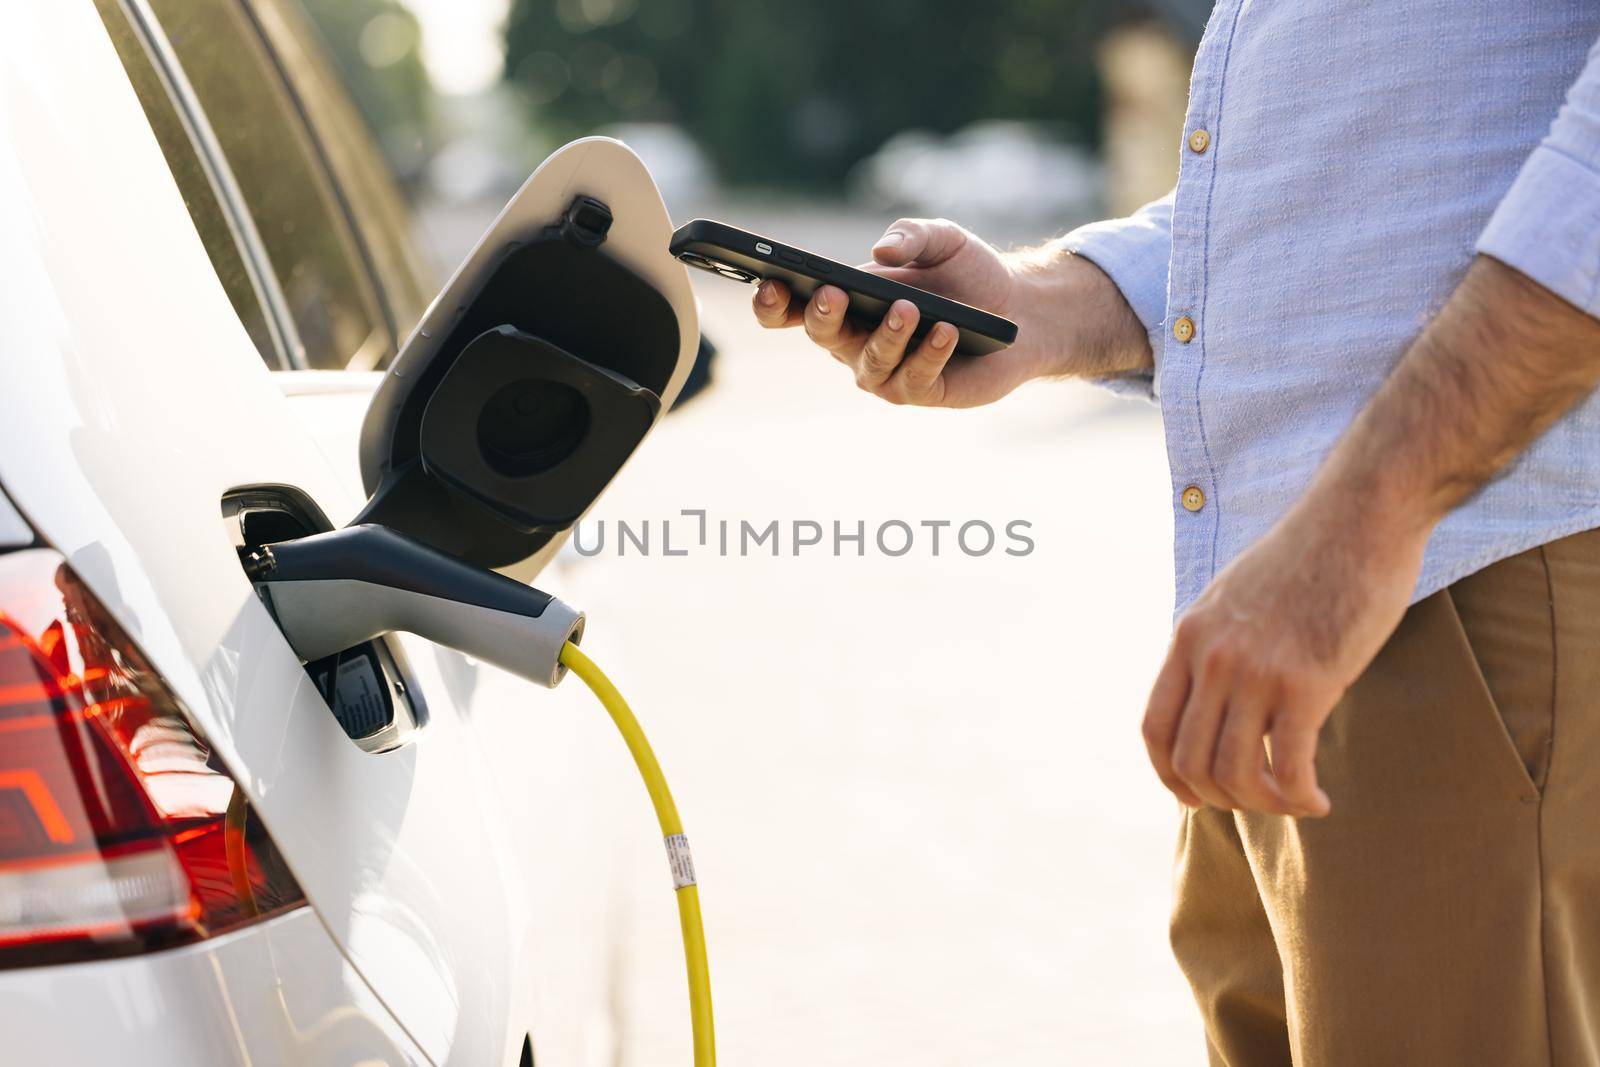 Unrecognizable man plugging electric car from charging station. Male plugging in power cord to electric car using app on smartphone. Businessman charging electric car at outdoor charging station